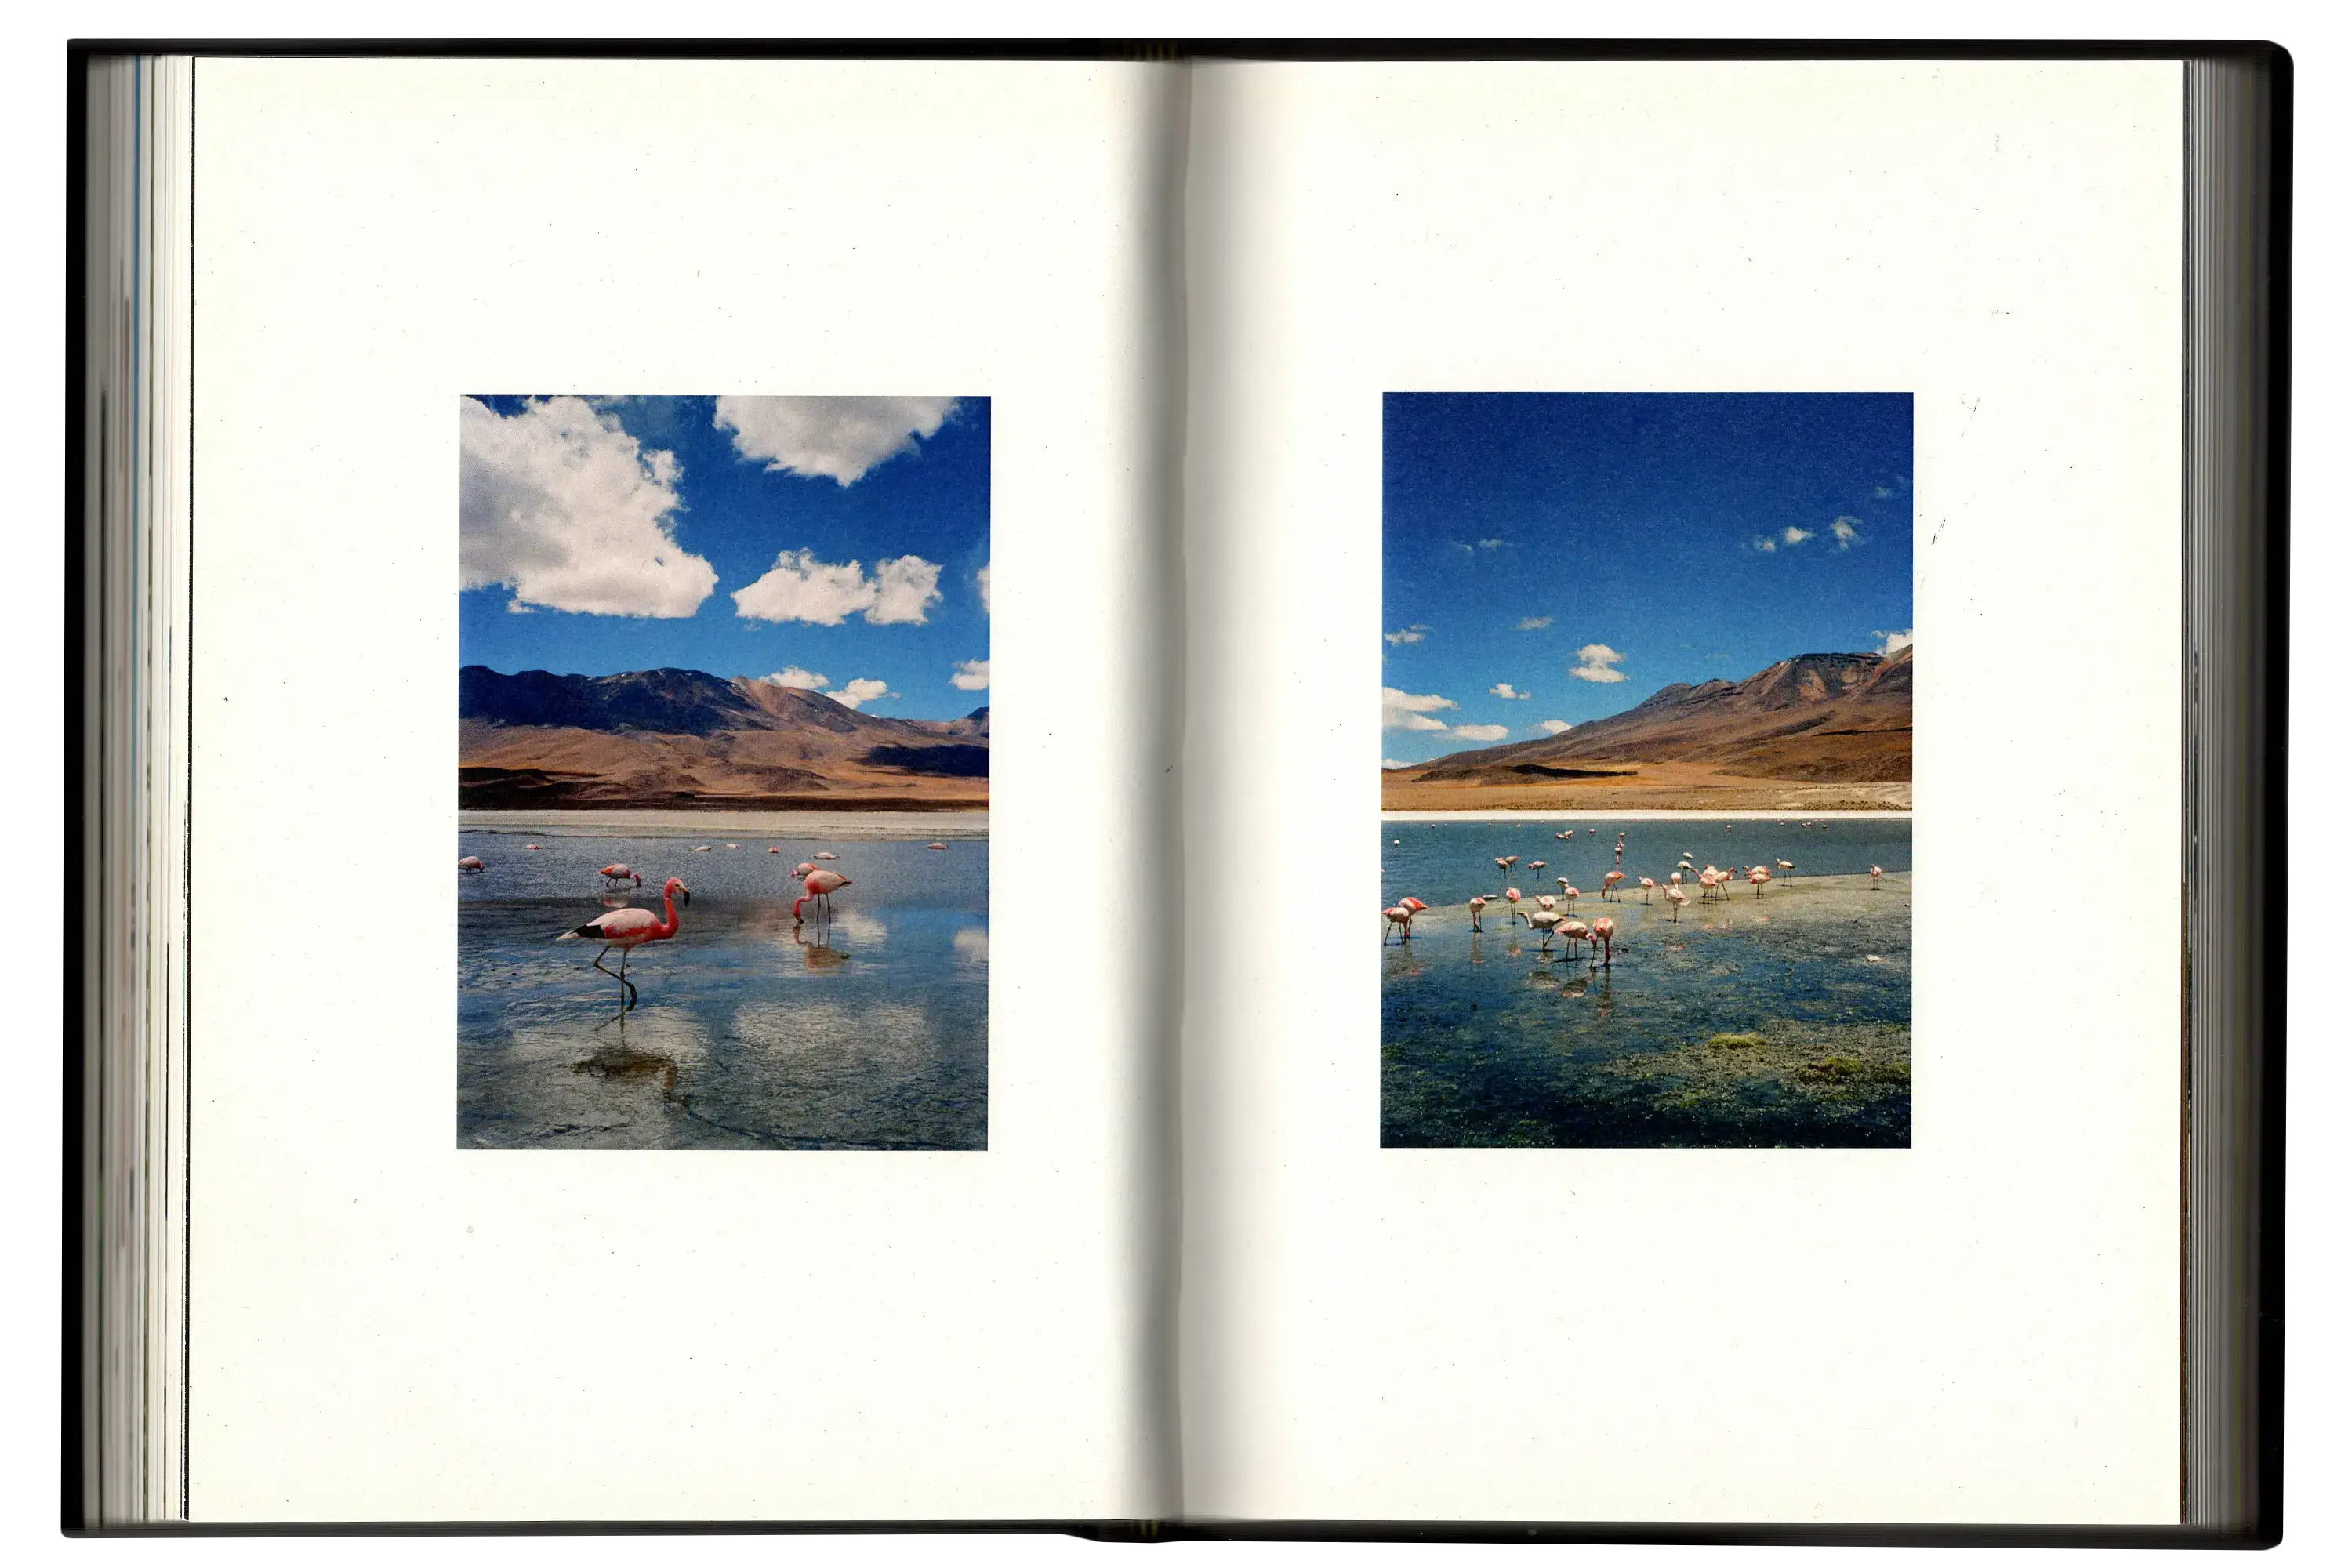 Imperfect Photo Book - image of flamingos in water on both pages of spread